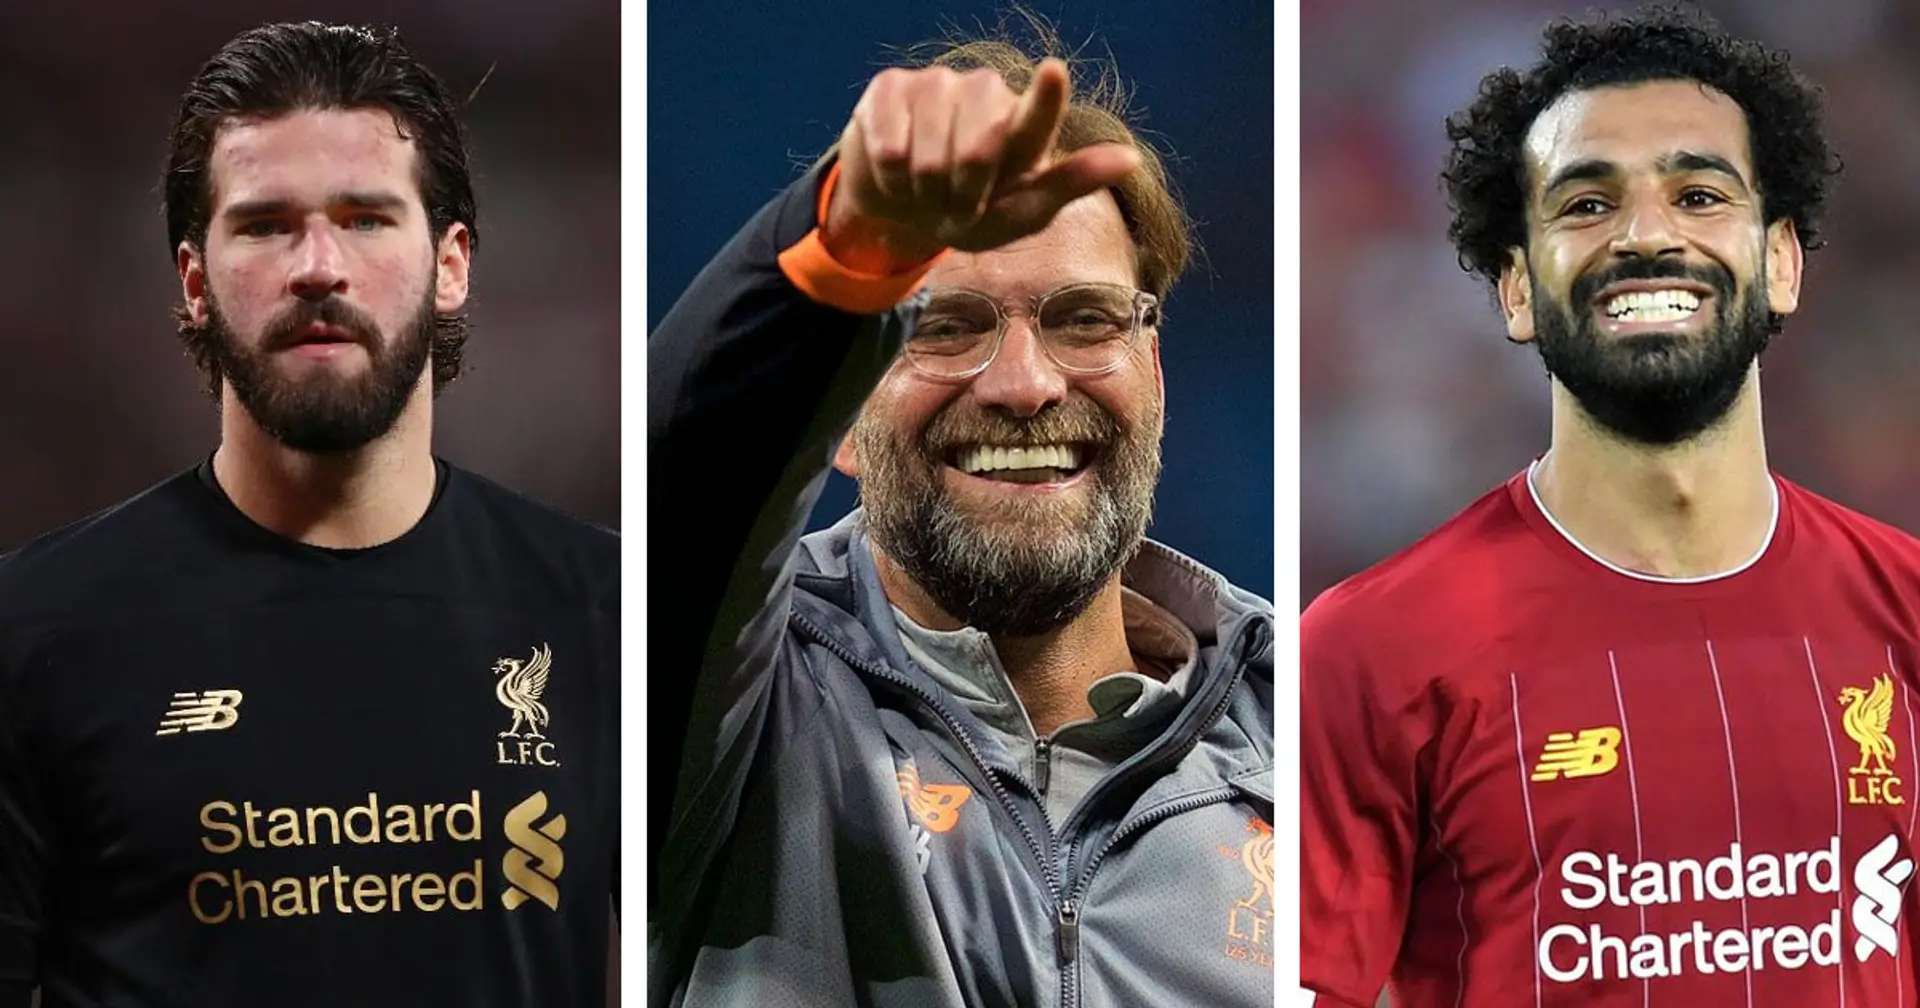 Klopp: 'My players don't need individual targets to be the highest motivated'